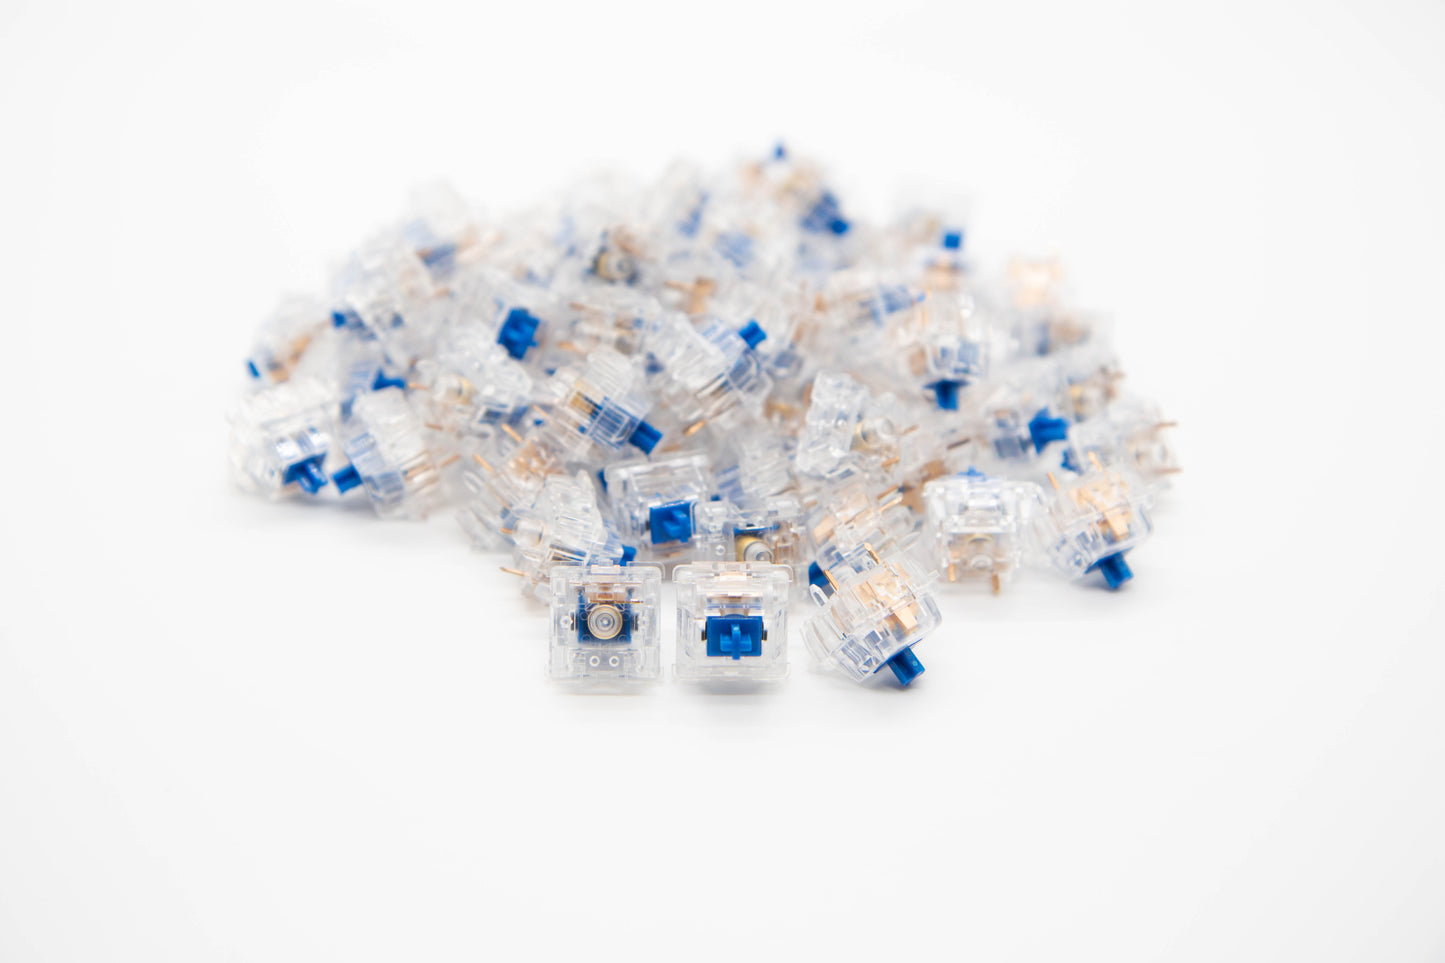 Close-up shot of a pile of Durock Dolphin mechanical keyboard switches featuring transparent housing and blue stems